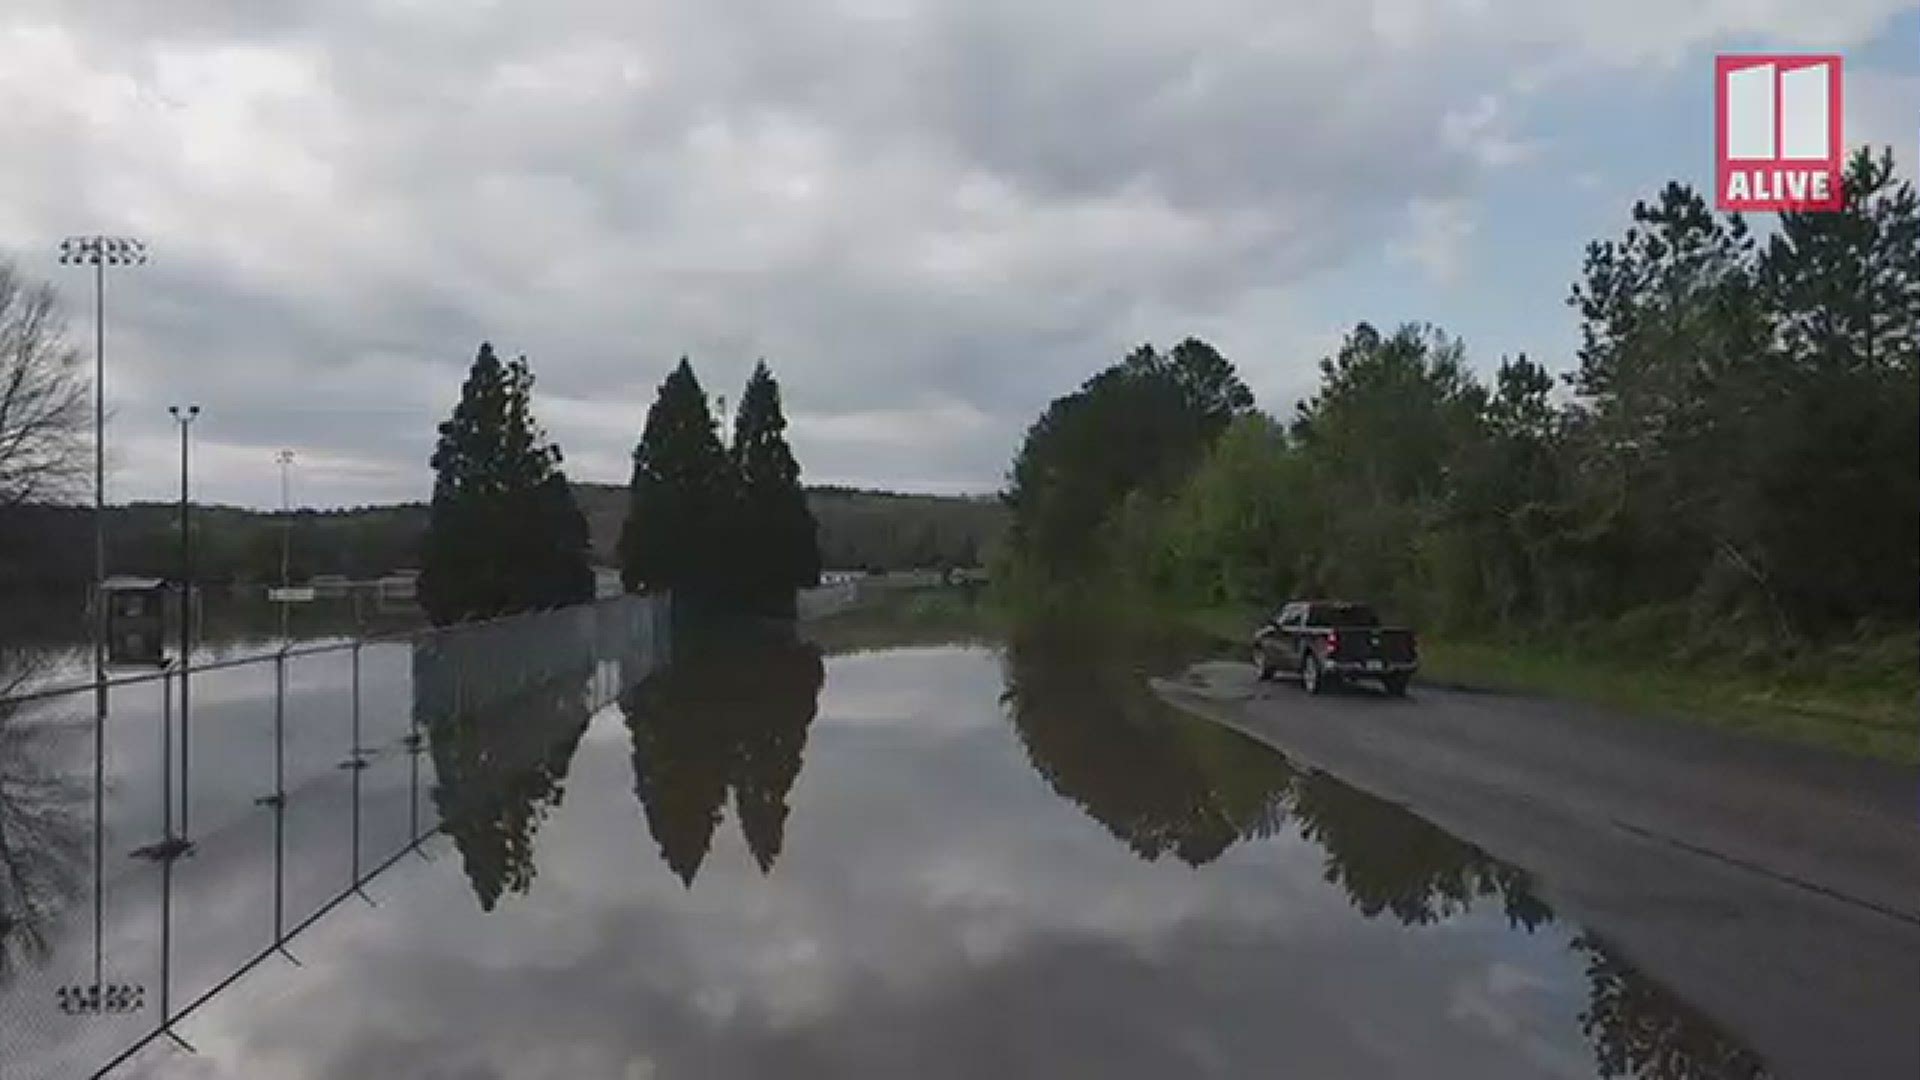 The video shows flooding across the park Friday, March 26, 2021 following a night a strong storms.